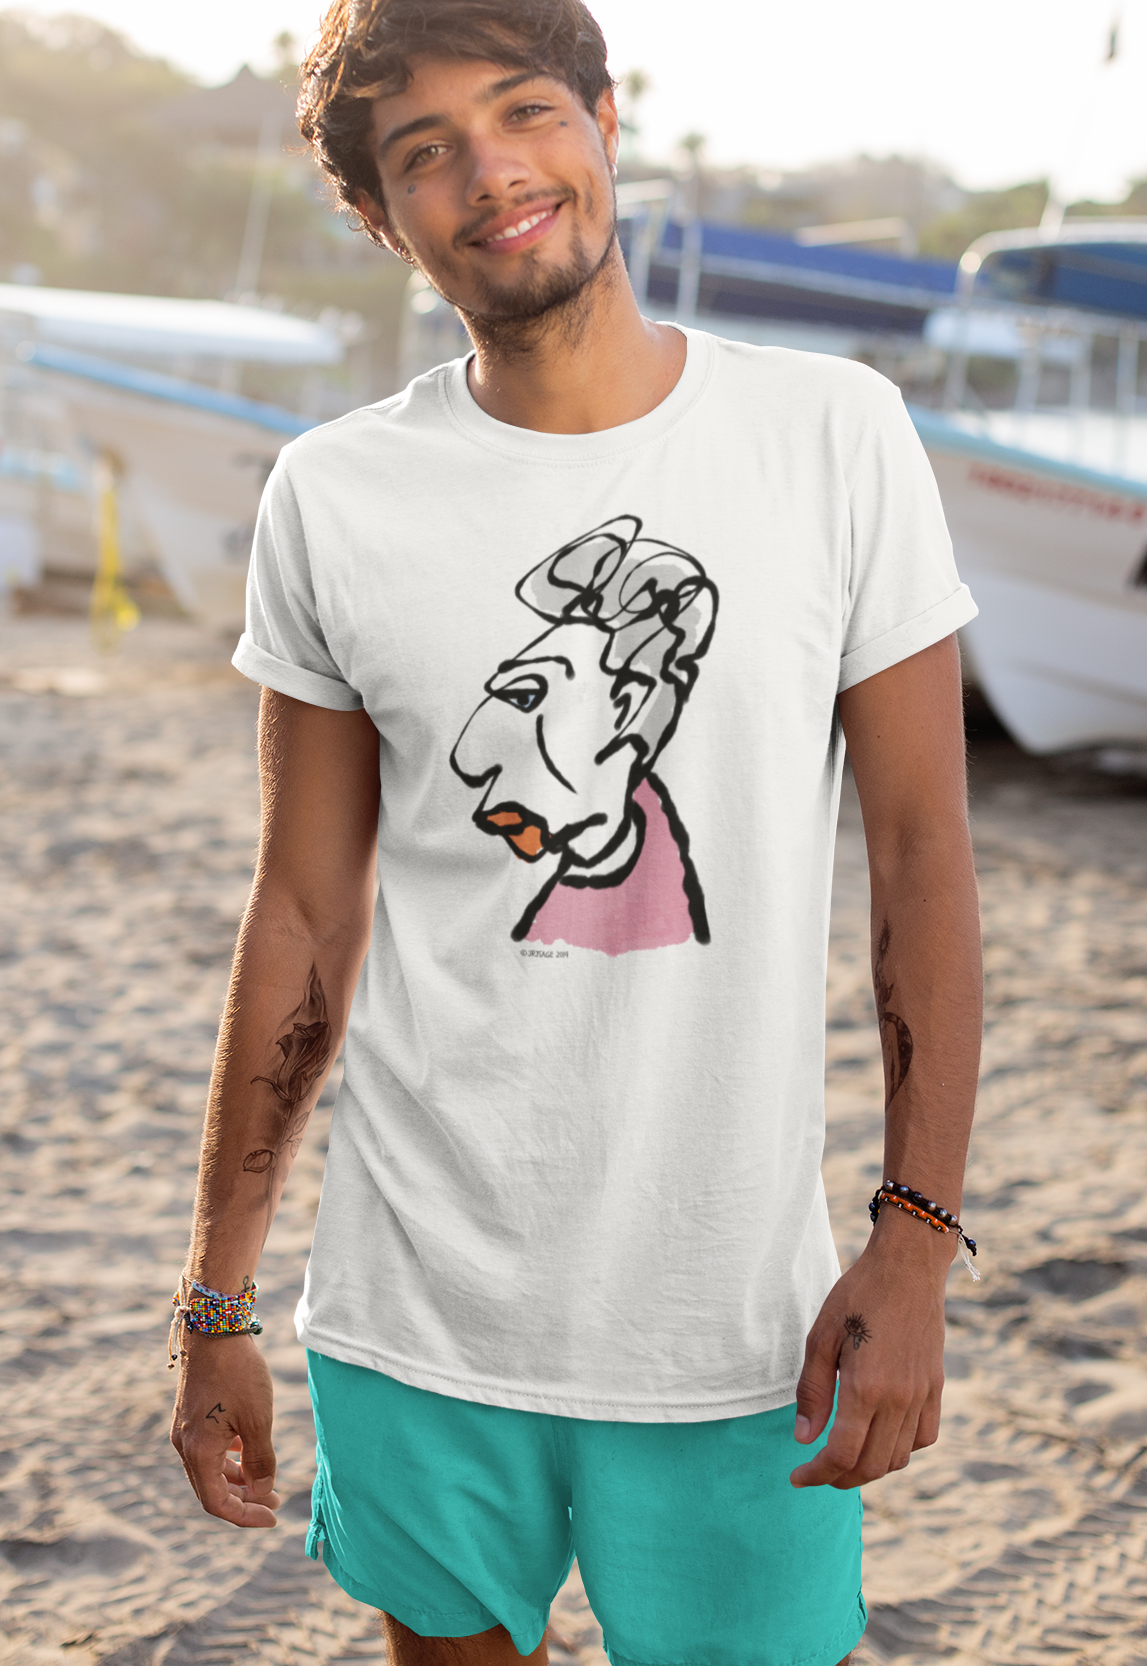 Glamorous Granny T-shirt - Young man wearing illustrated Glamorous Granny T-shirt on classic white by Hector and Bone